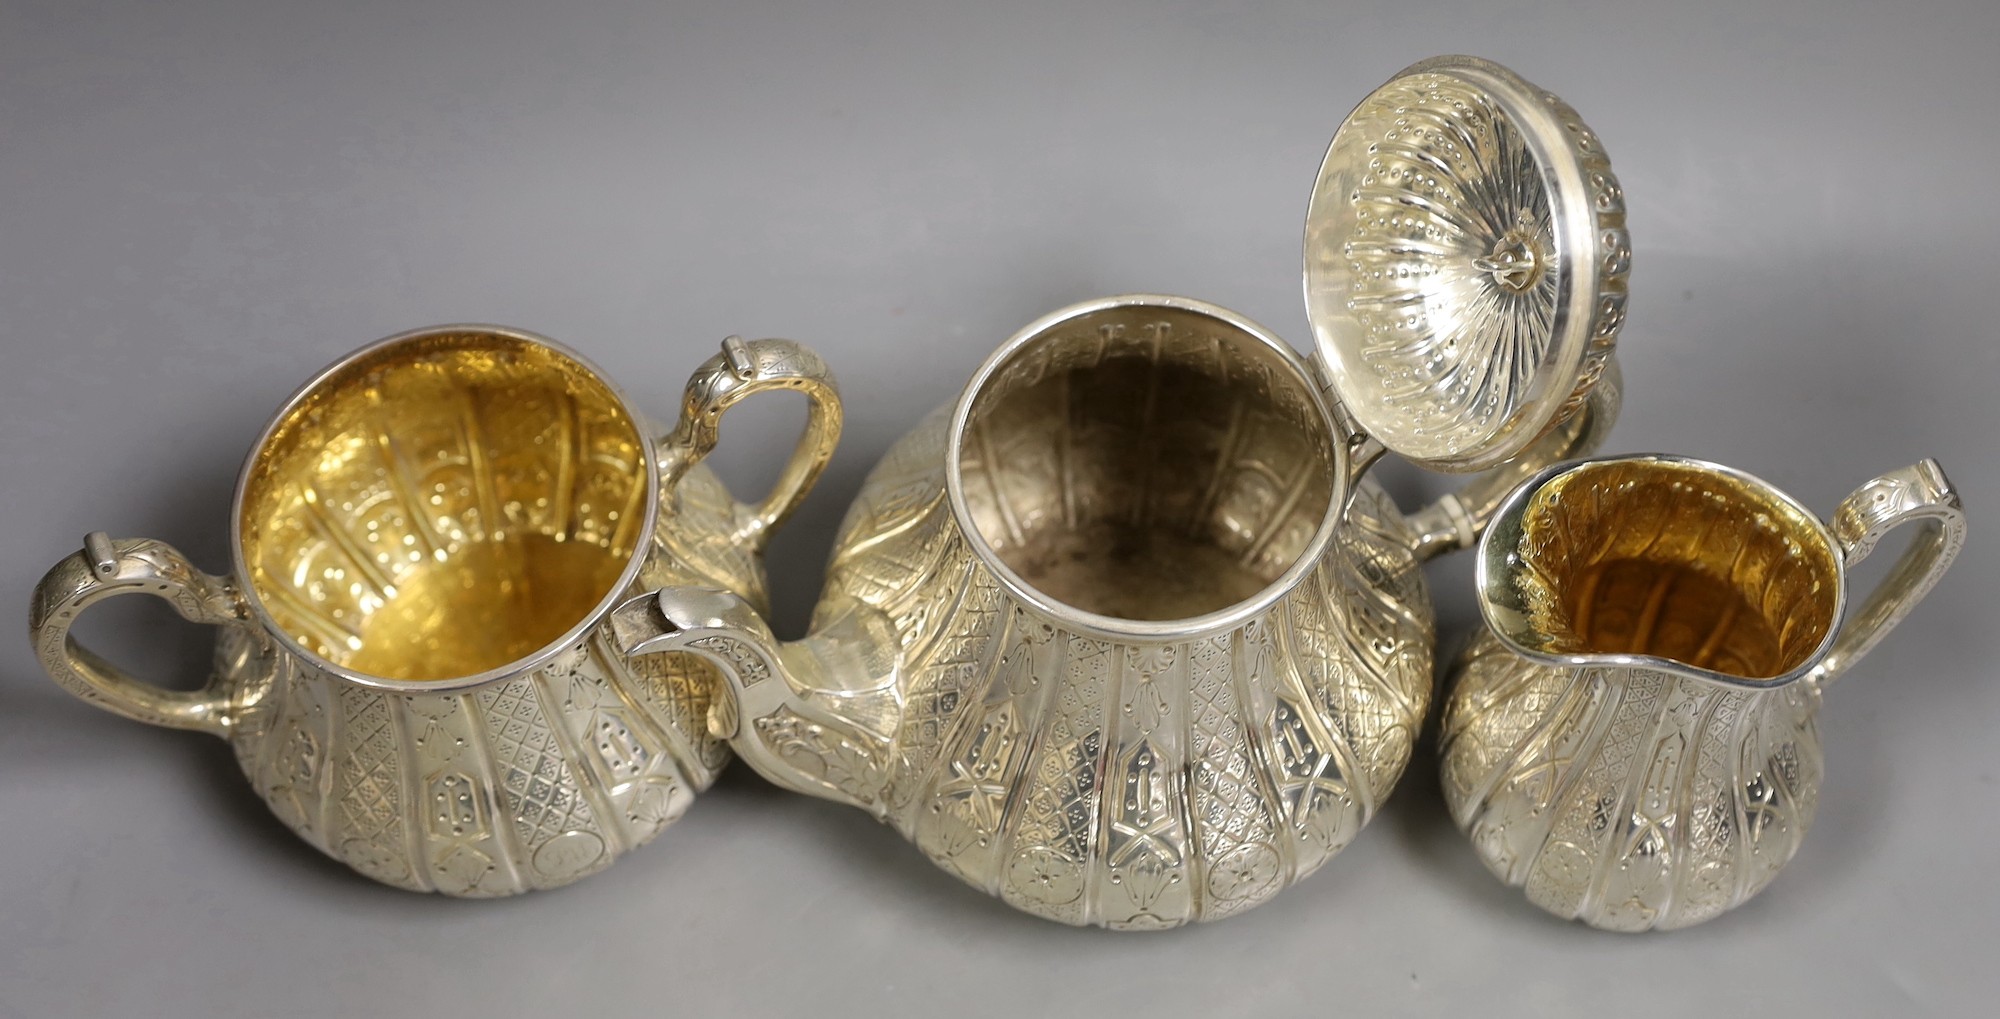 A Victorian engraved silver three piece tea set, of pear shape, by John Samuel Hunt (Hunt & Roskell late Storr & Mortimer), London, 1855/6, gross weight 45.4oz, together with original catalogue and purchase receipt, date